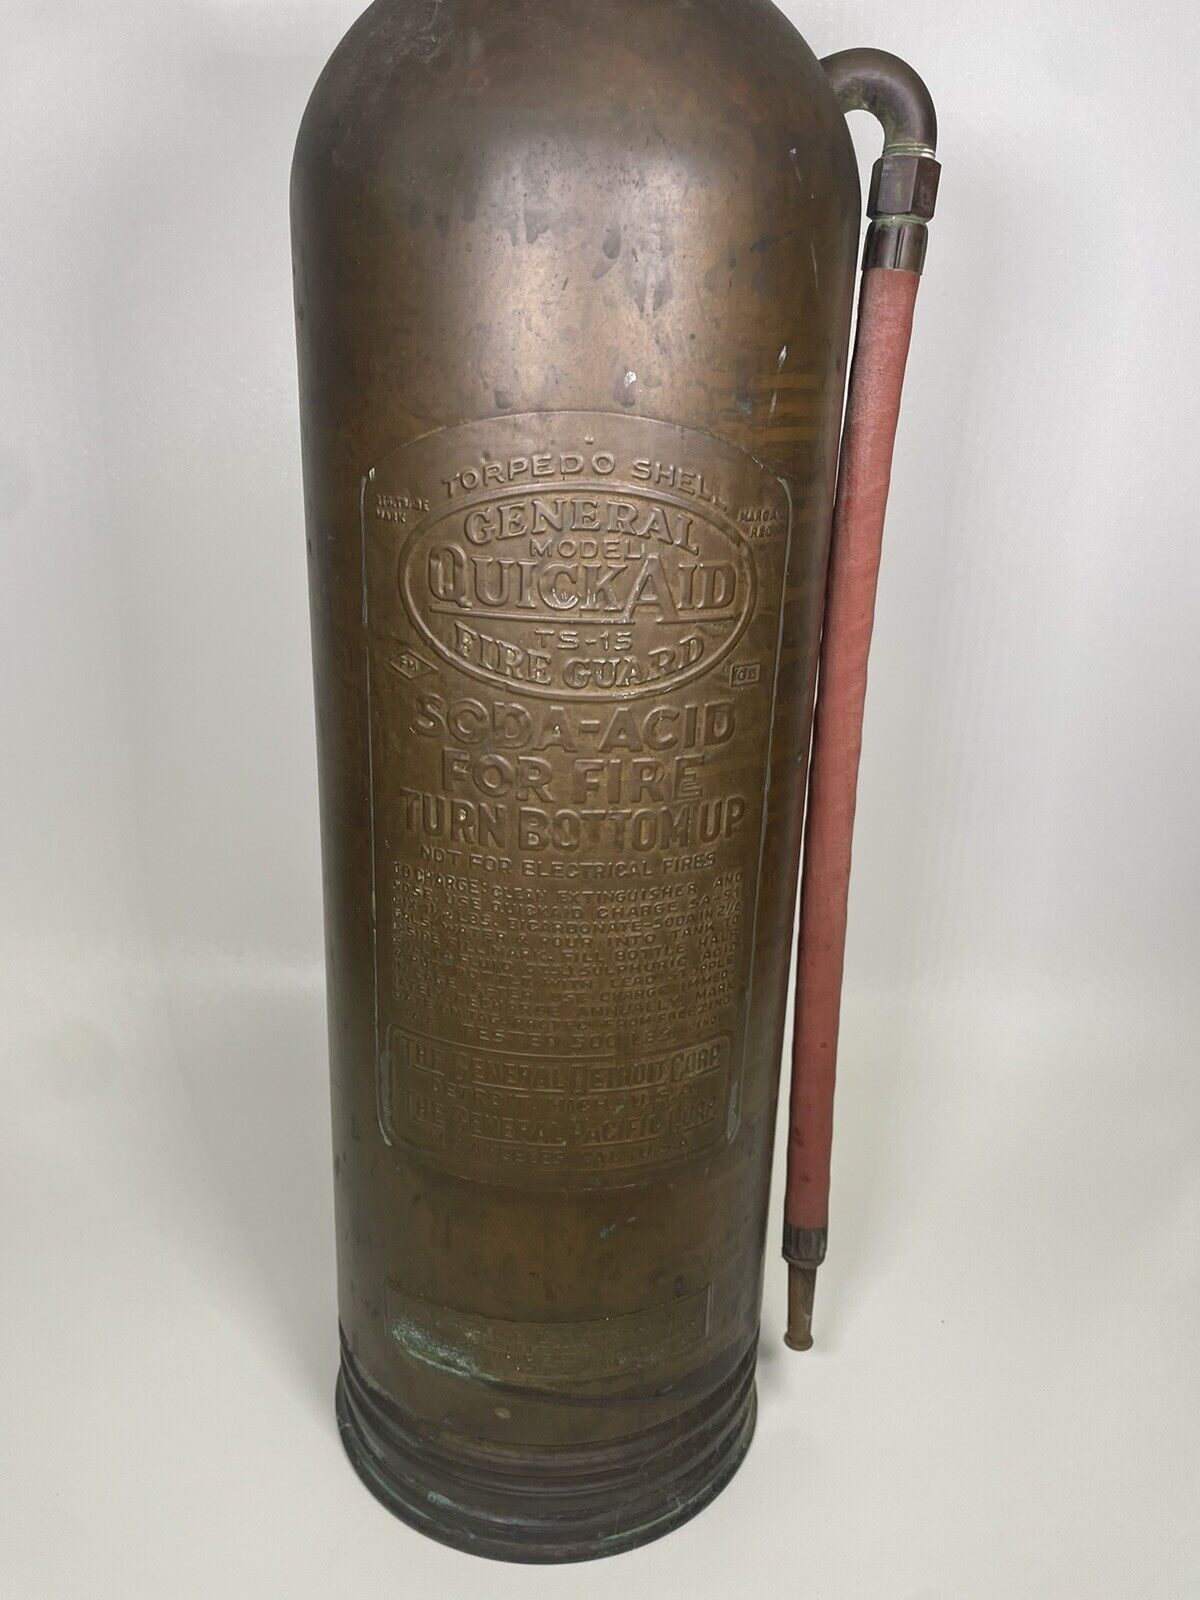 Antique GENERAL QUICK AID BRASS FIRE EXTINGUISHER TS 15 24 inches tall